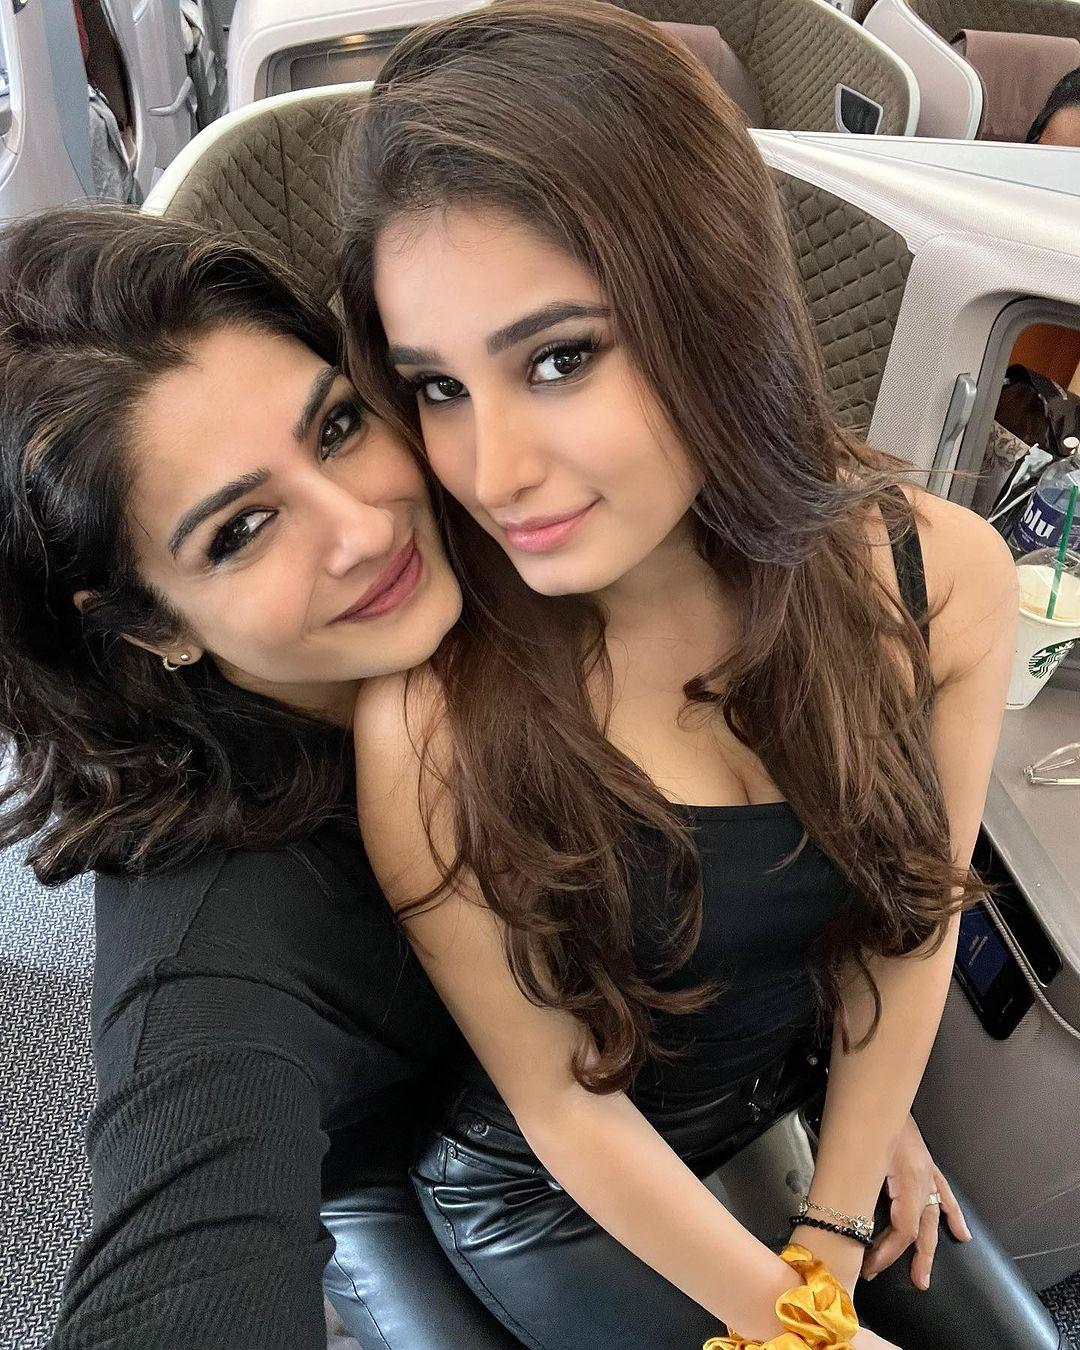 She has 3 daughters. 2 daughters, Pooja and Chhaya, in addition to her youngest daughter, Rasha Thadani, from her marriage to film distributor Anil Thadani.